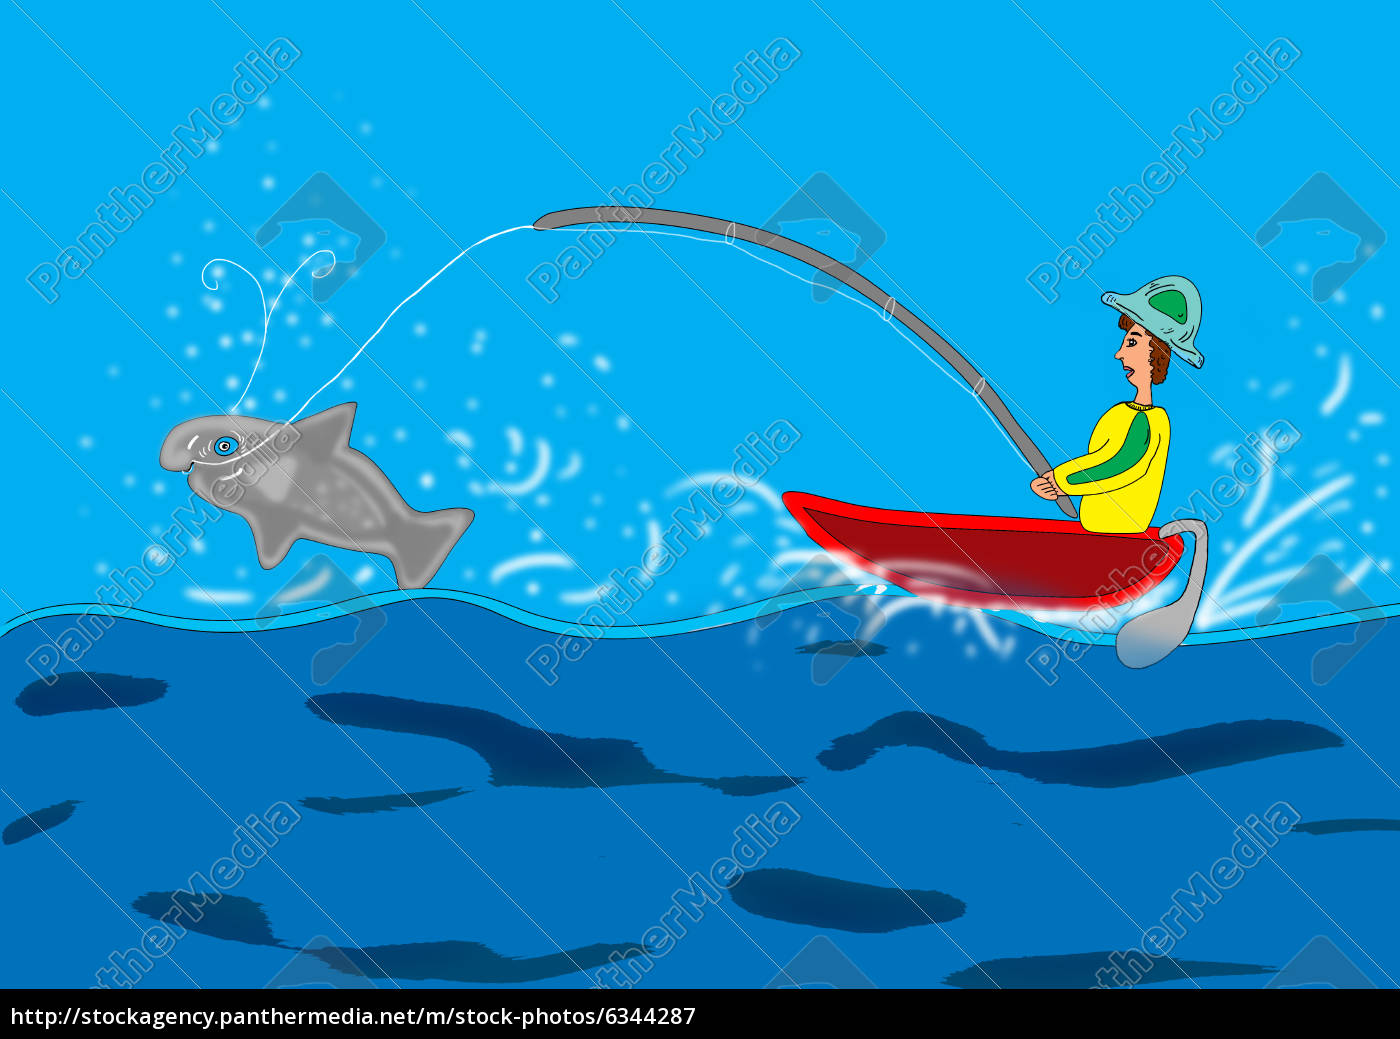 big fish on the hook - Stock Photo #6344287